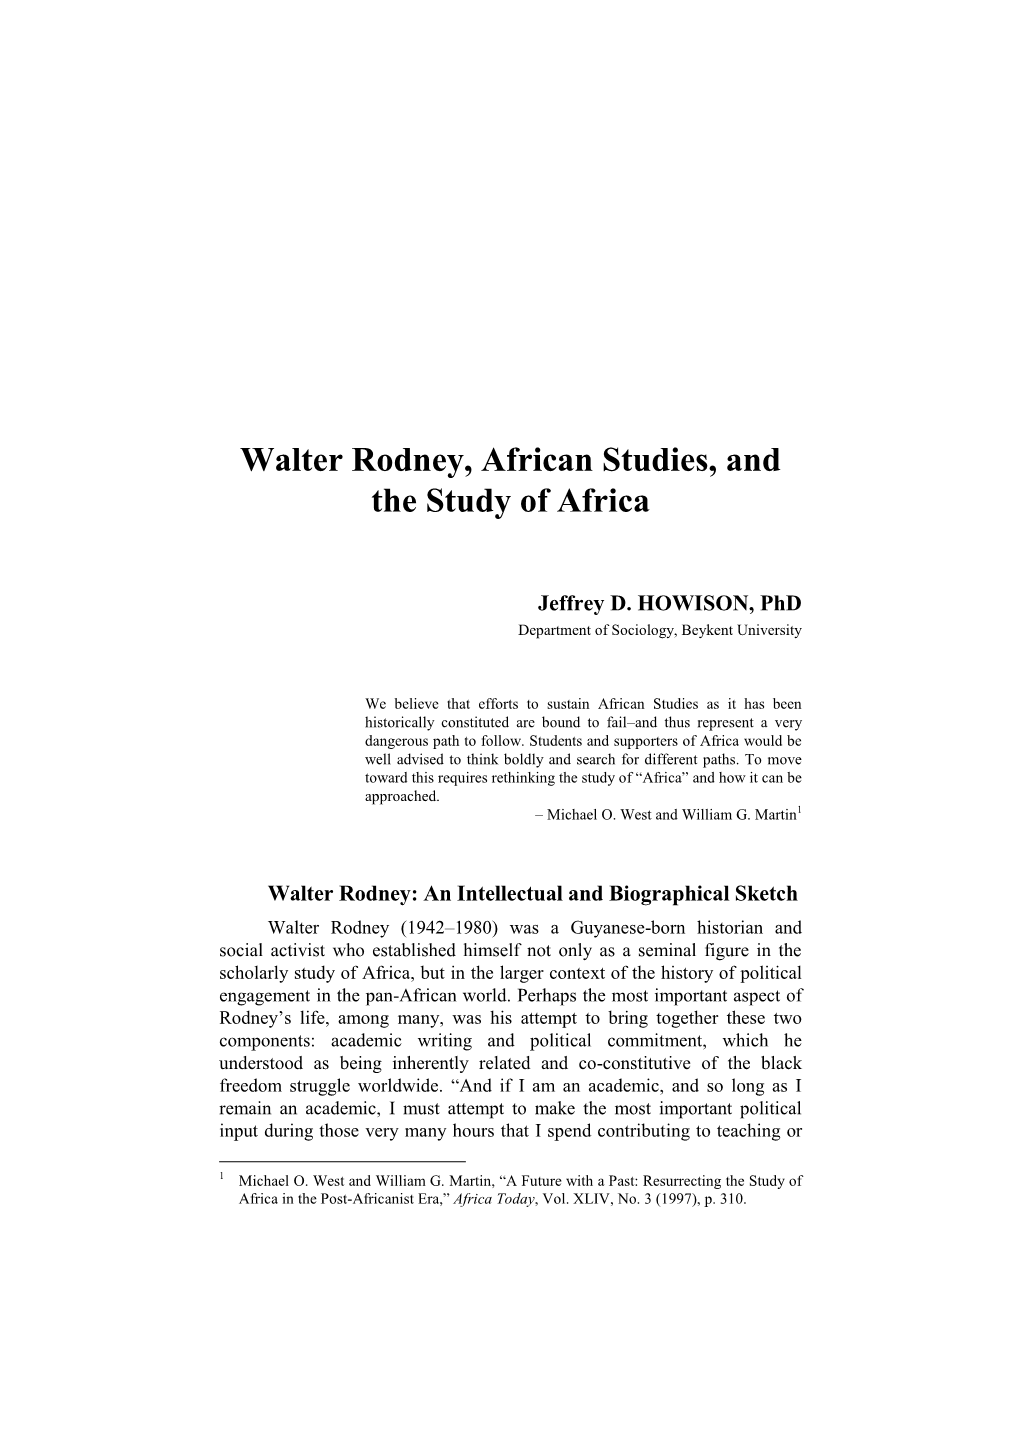 Walter Rodney, African Studies, and the Study of Africa